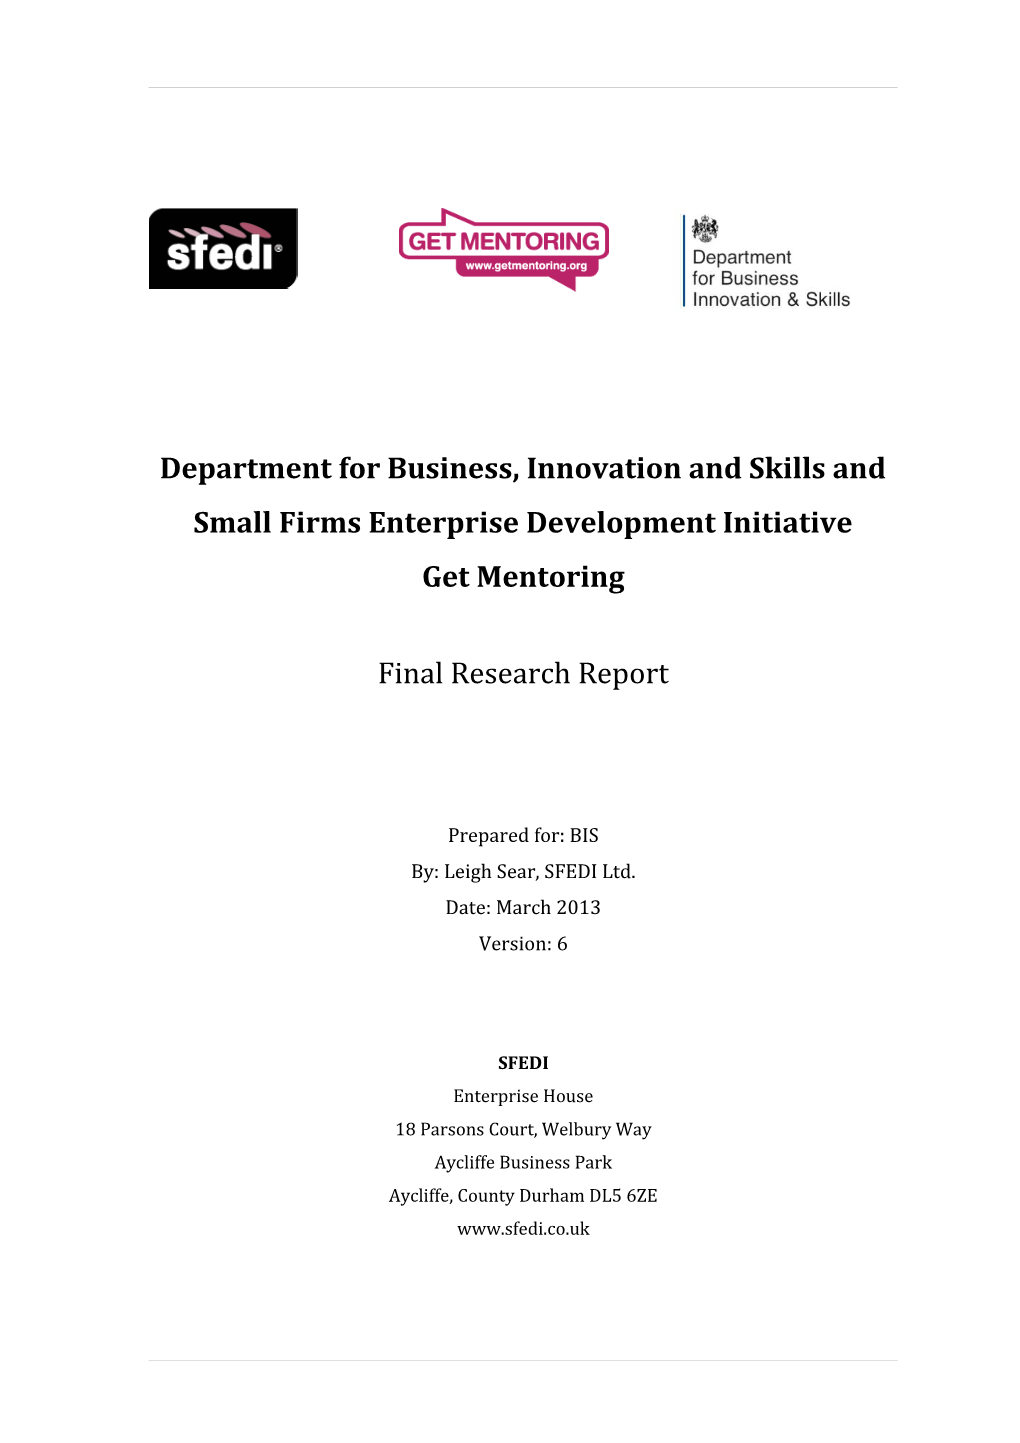 Department for Business, Innovation and Skills and Small Firms Enterprise Development